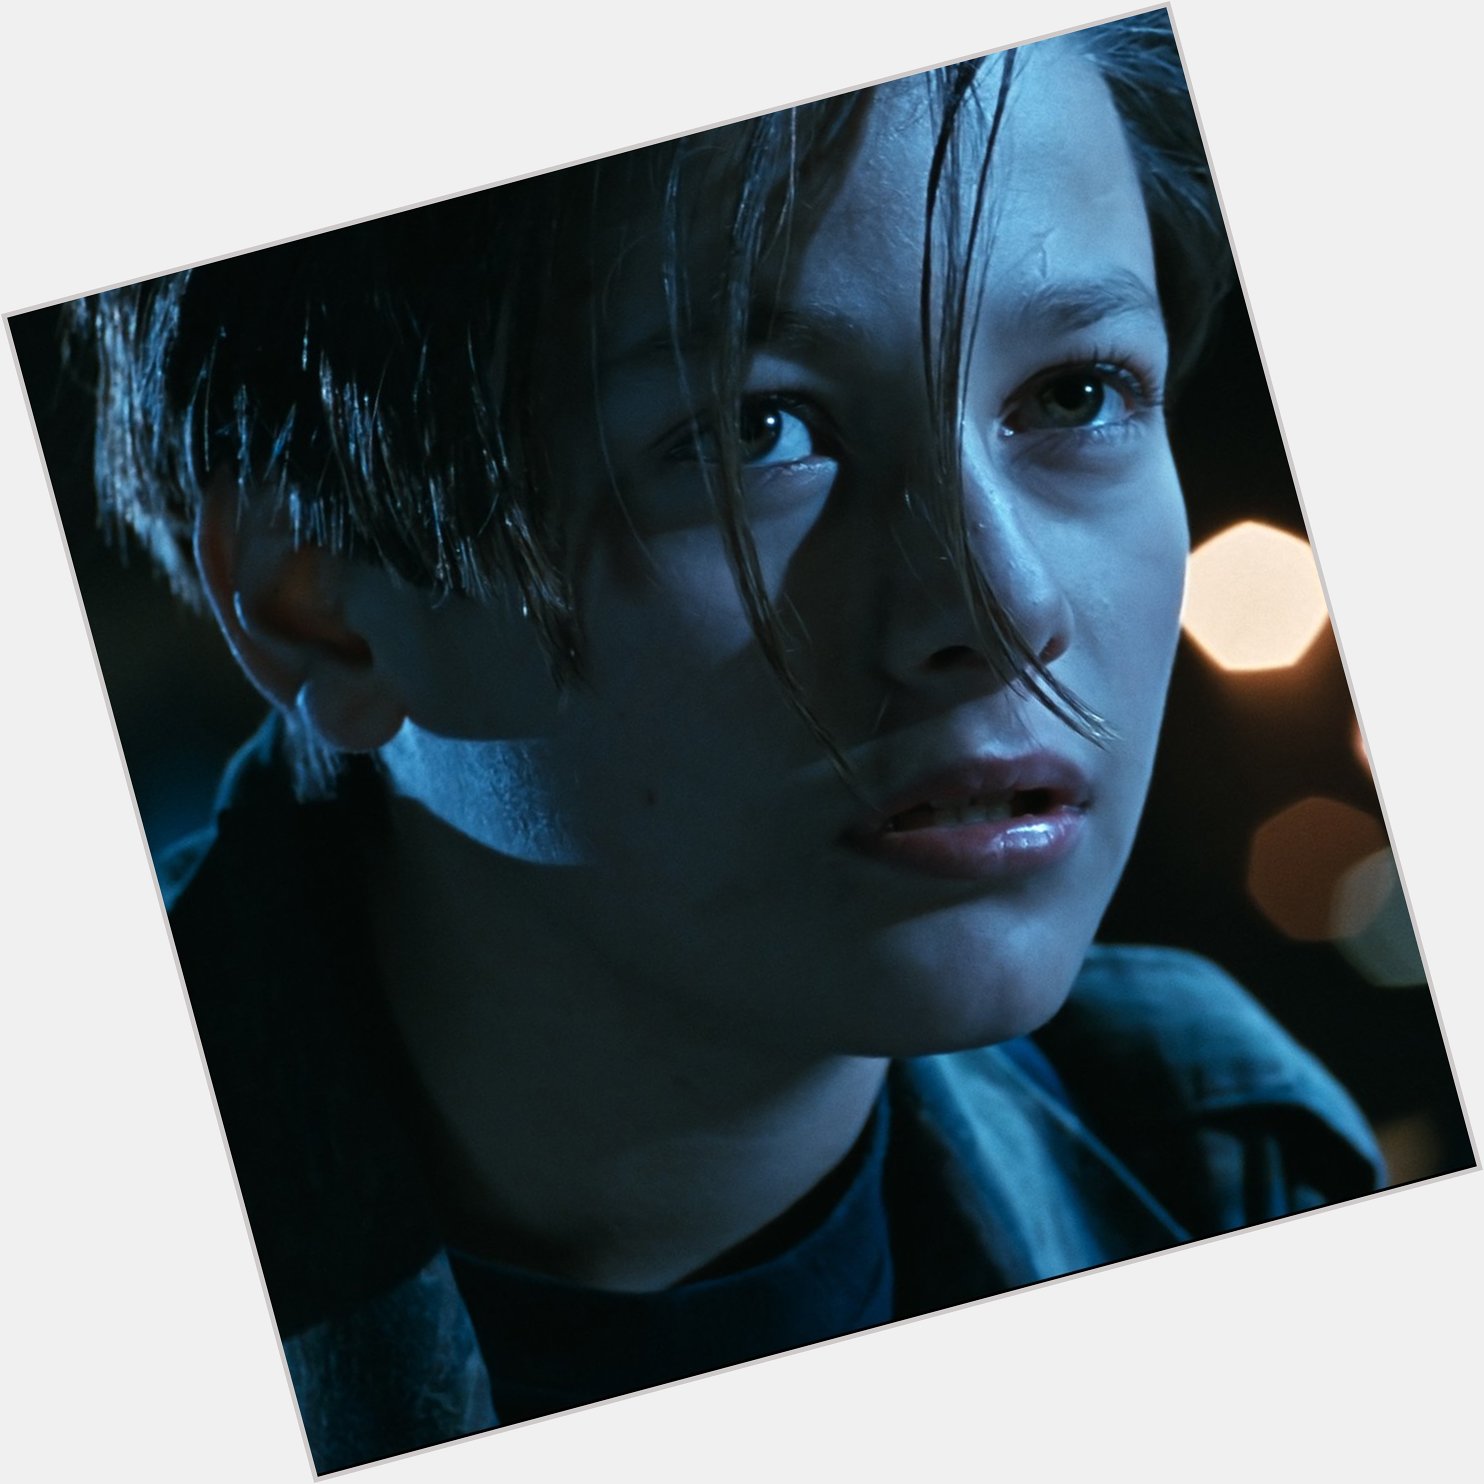 Happy birthday to the one who changed the fate of so many in Edward Furlong! 